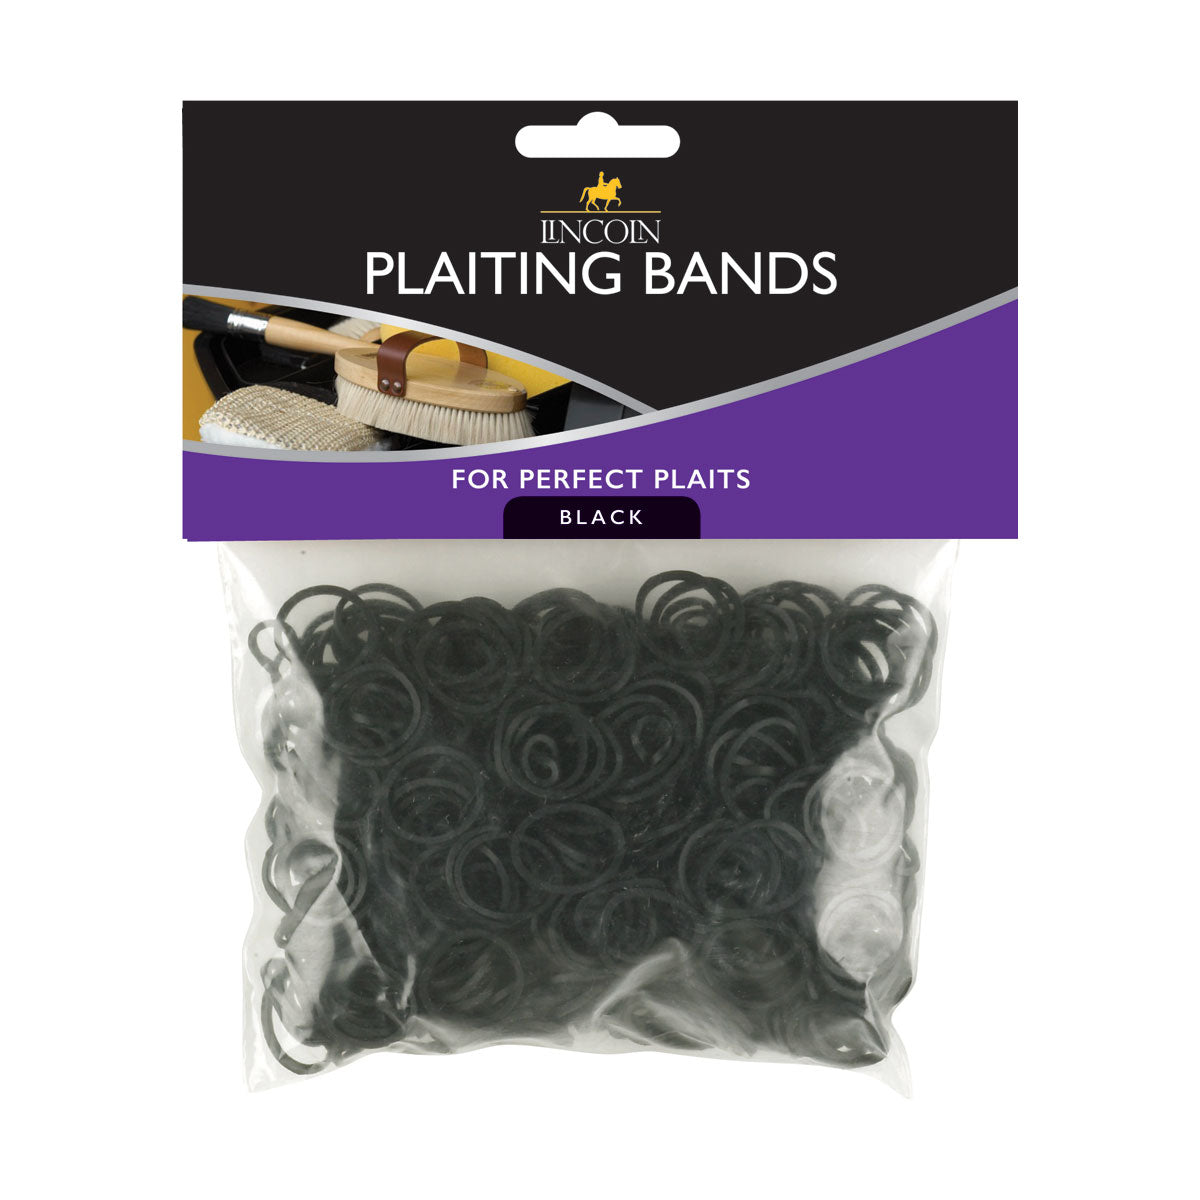 Lincoln Plaiting Bands x 500